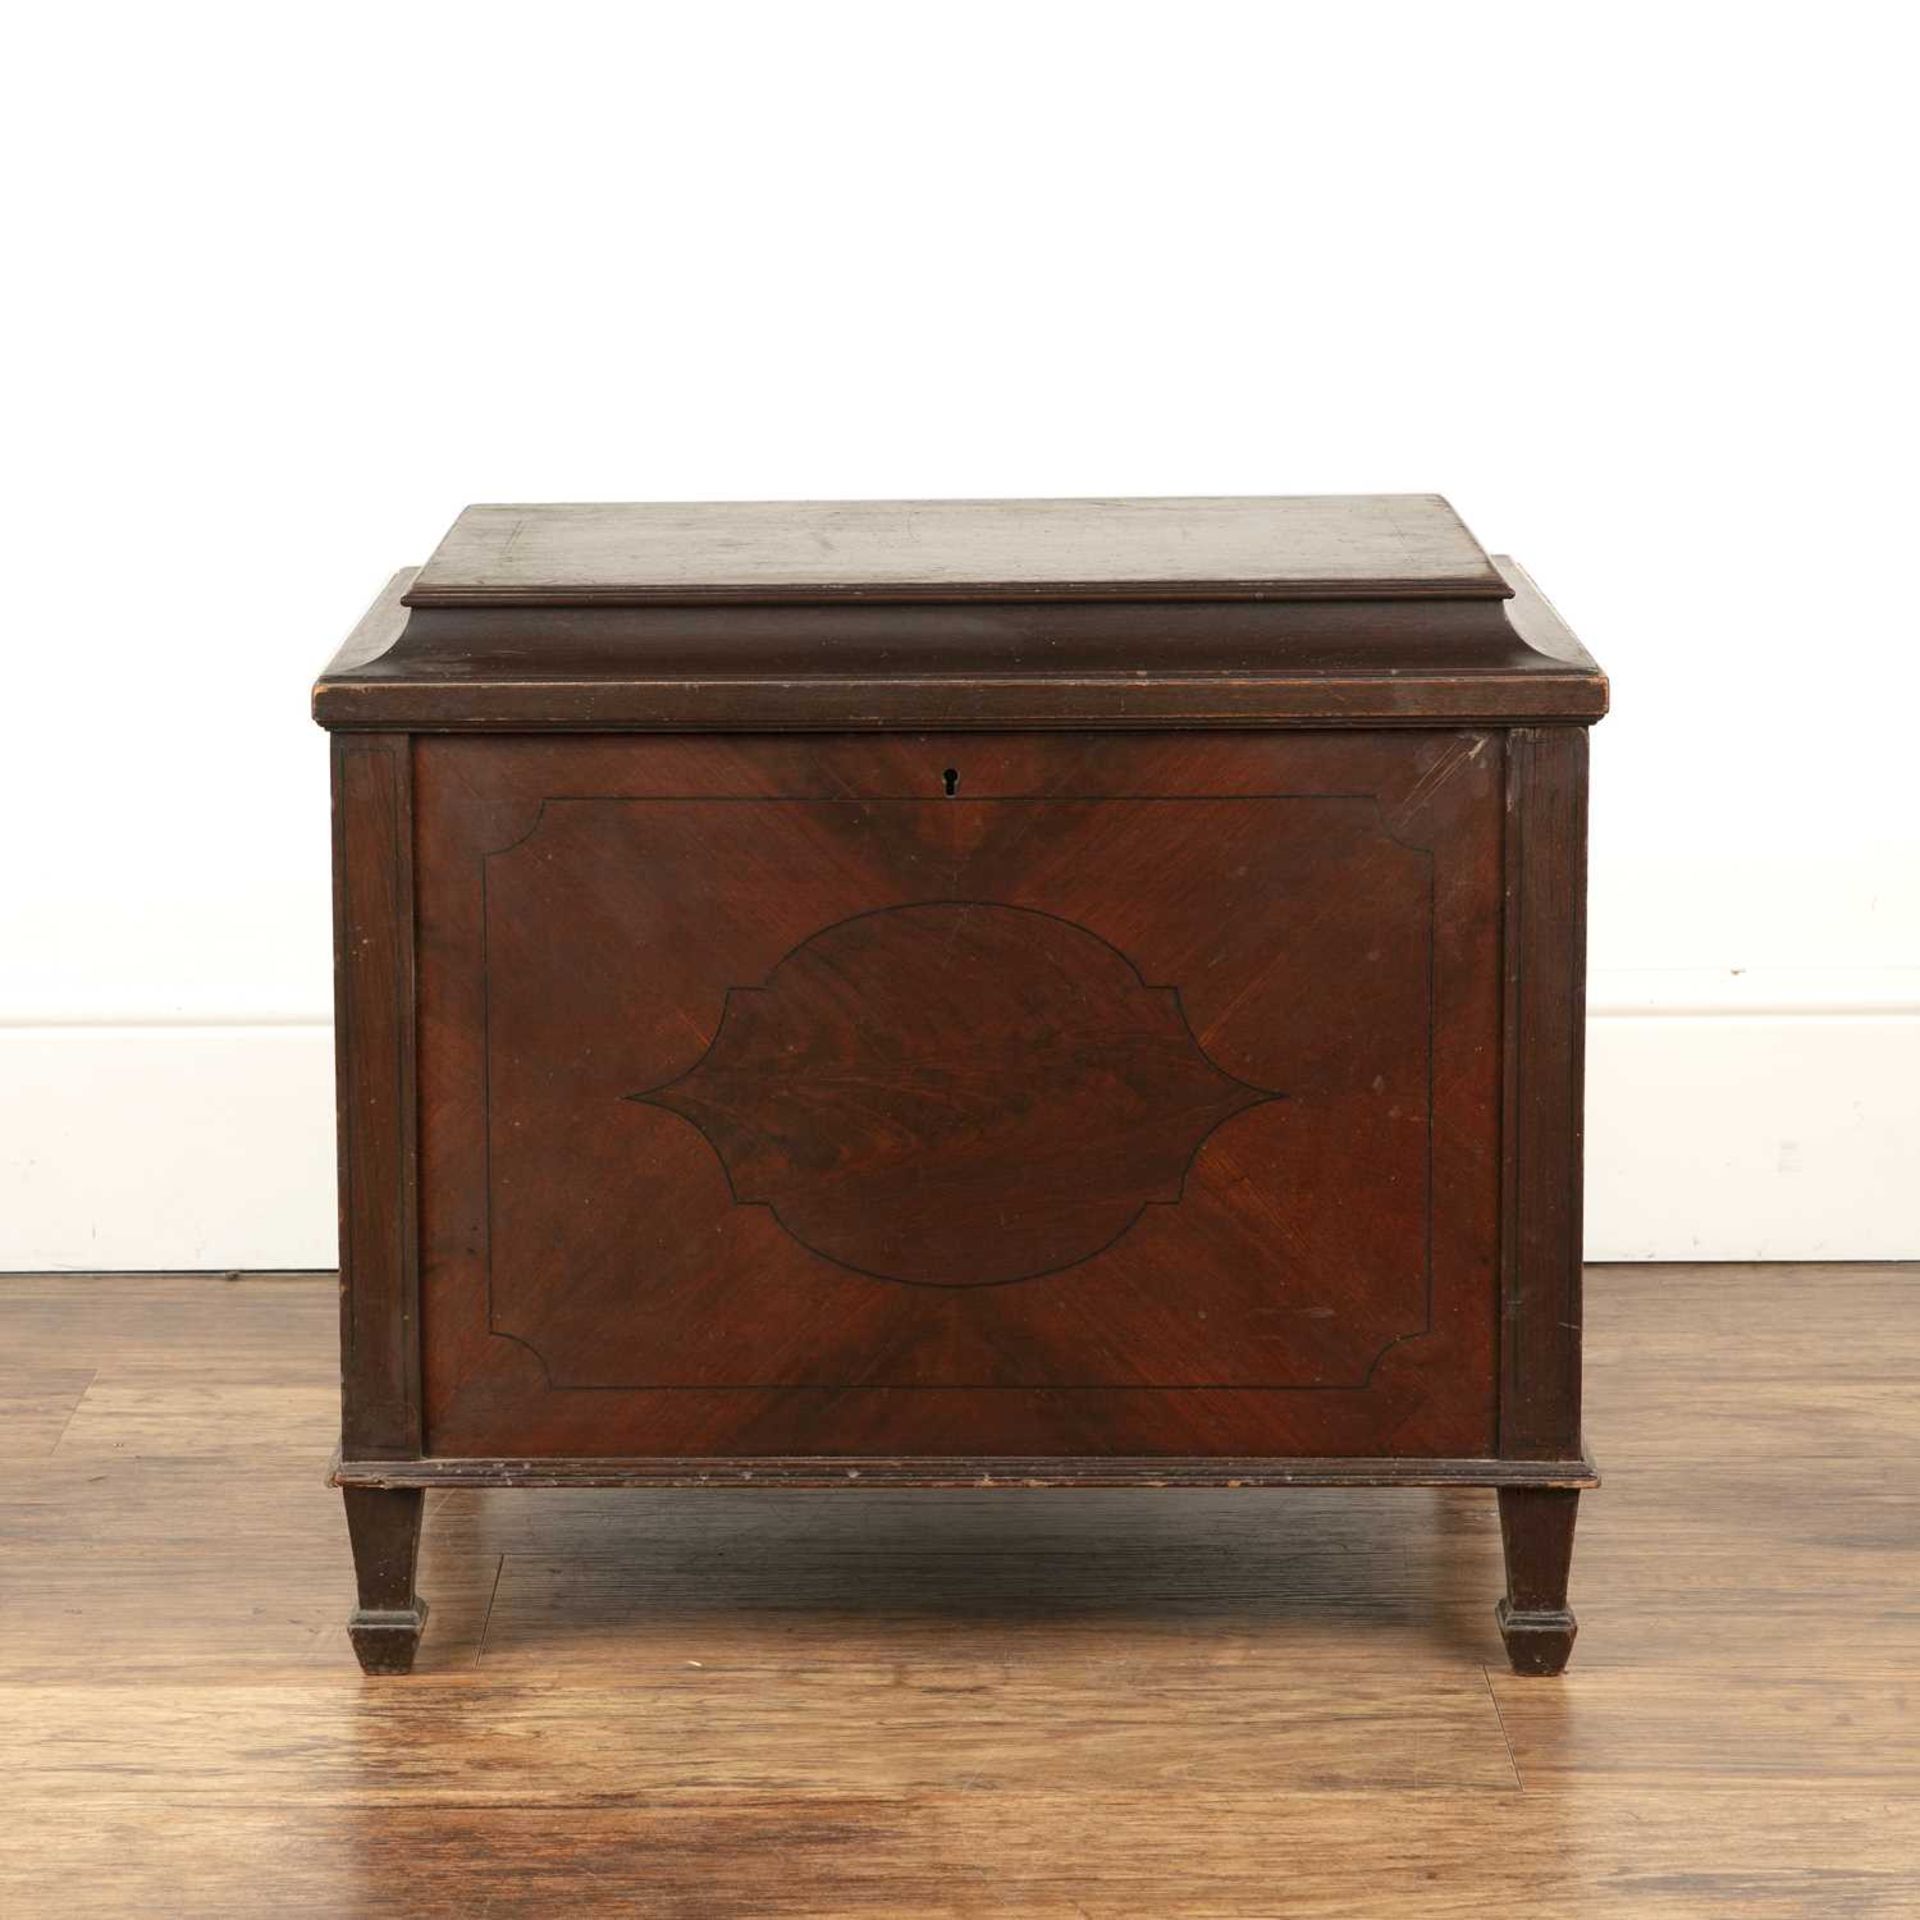 Mahogany and line inlaid cellarette 19th Century, with part lead-lined interior, 56cm wide, 41cm